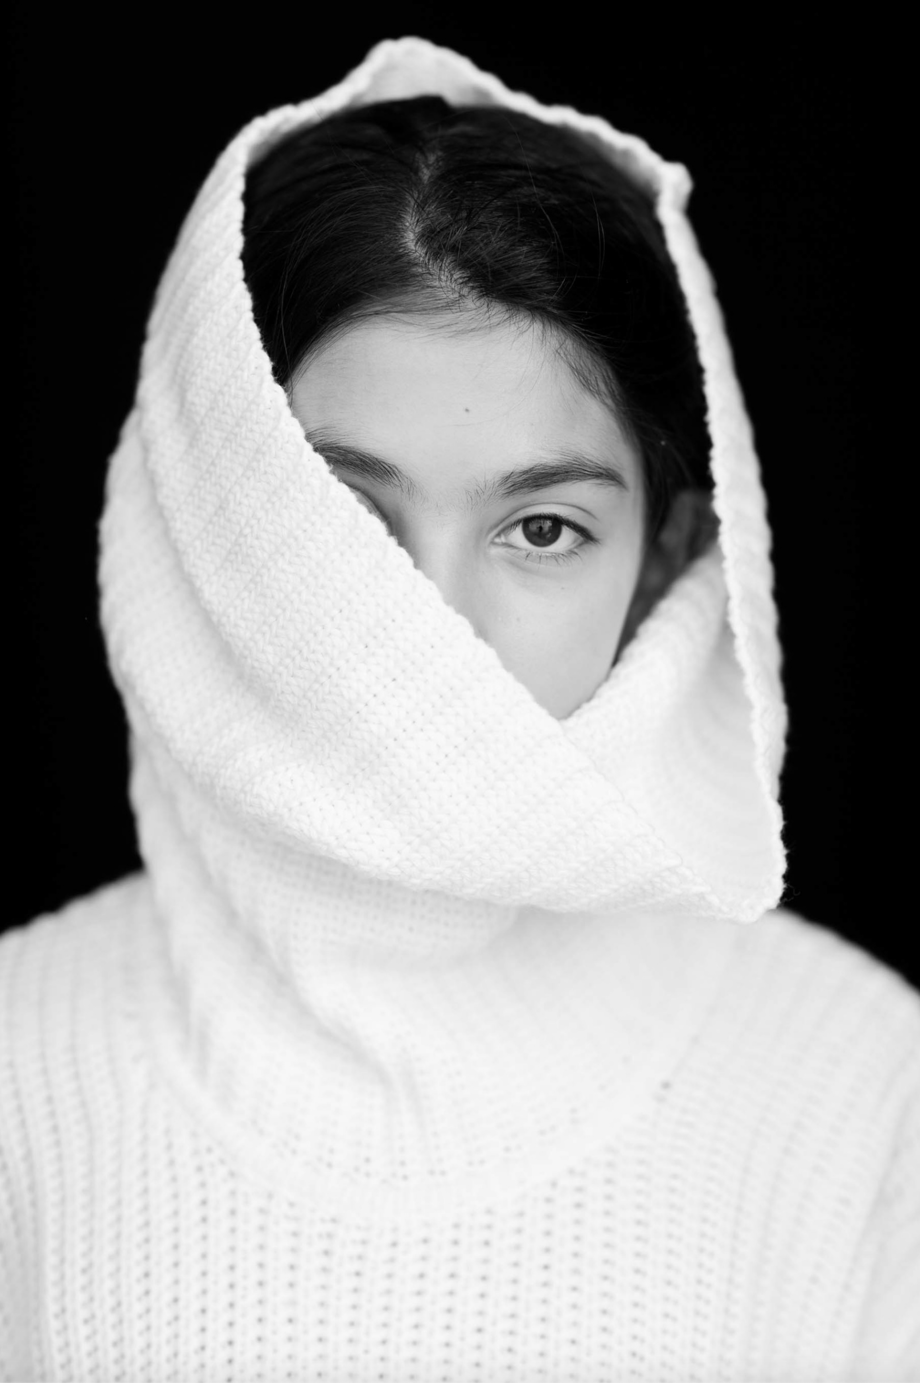 Image of a young girl in black and white photographed by Margo Moritz